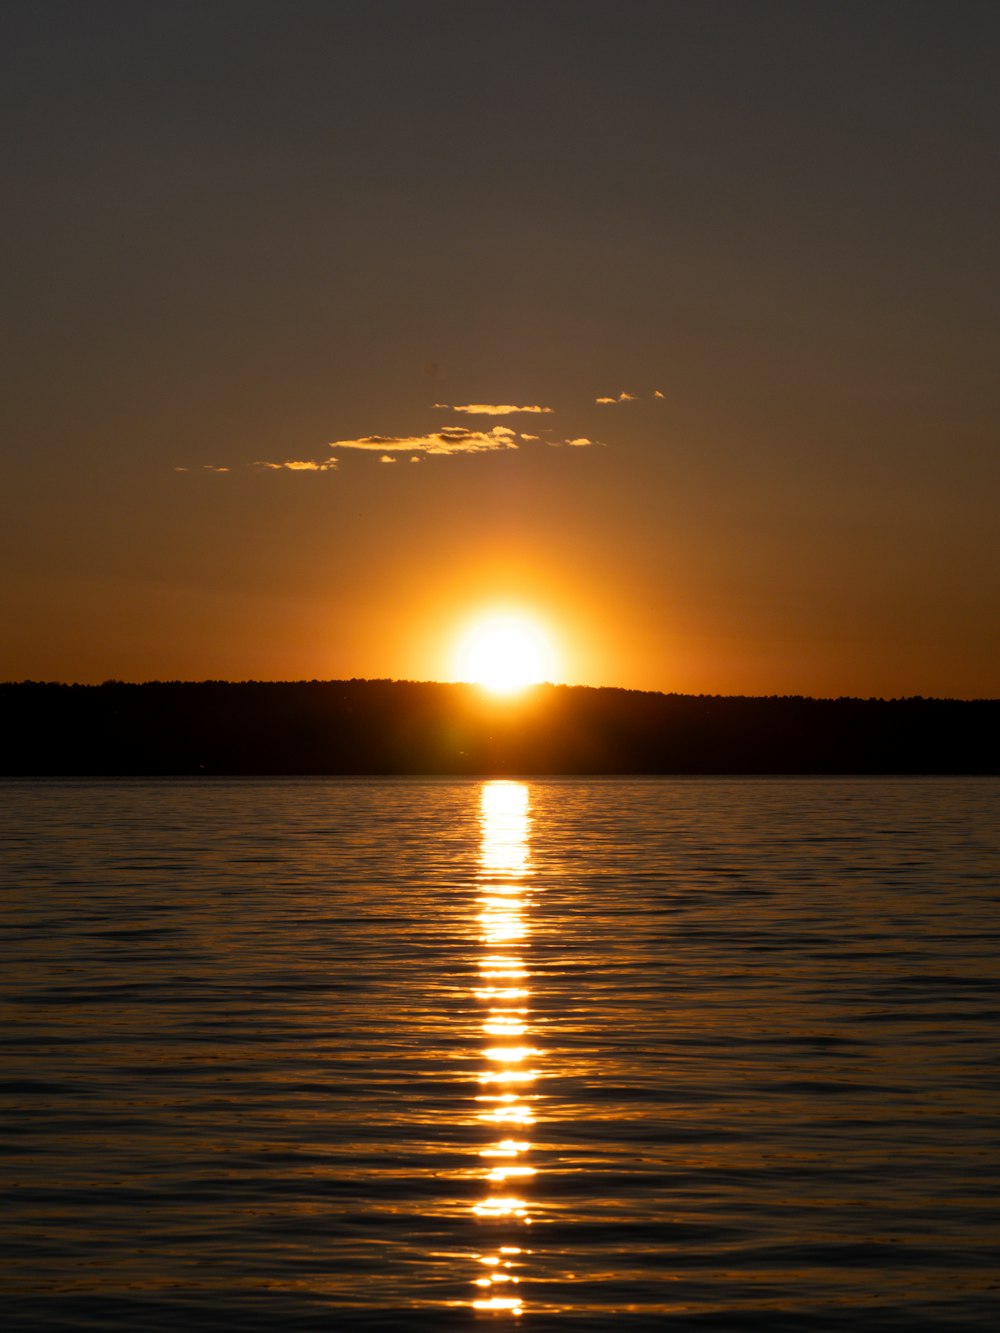 the sun is setting over a body of water